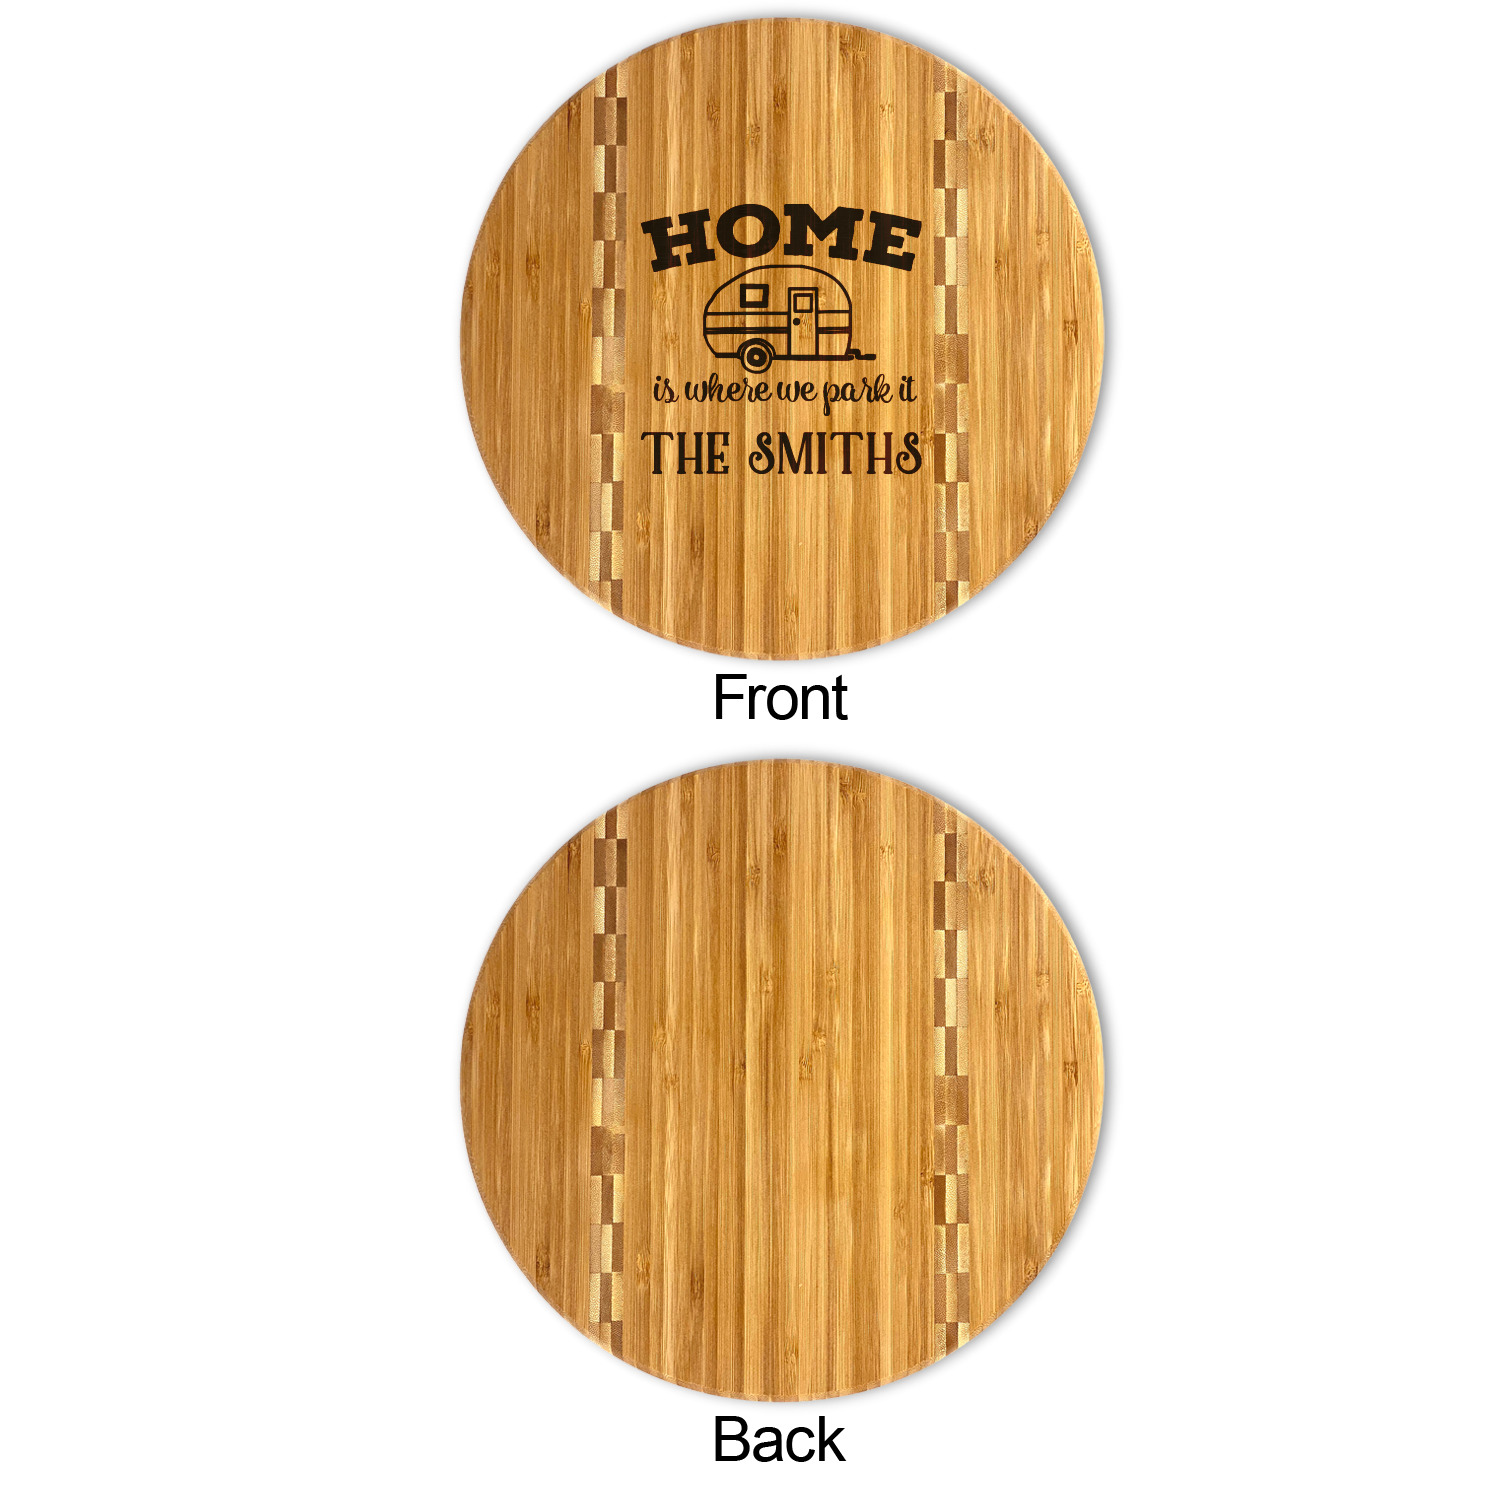 https://www.youcustomizeit.com/common/MAKE/1764509/Camper-Bamboo-Cutting-Boards-APPROVAL.jpg?lm=1658265540